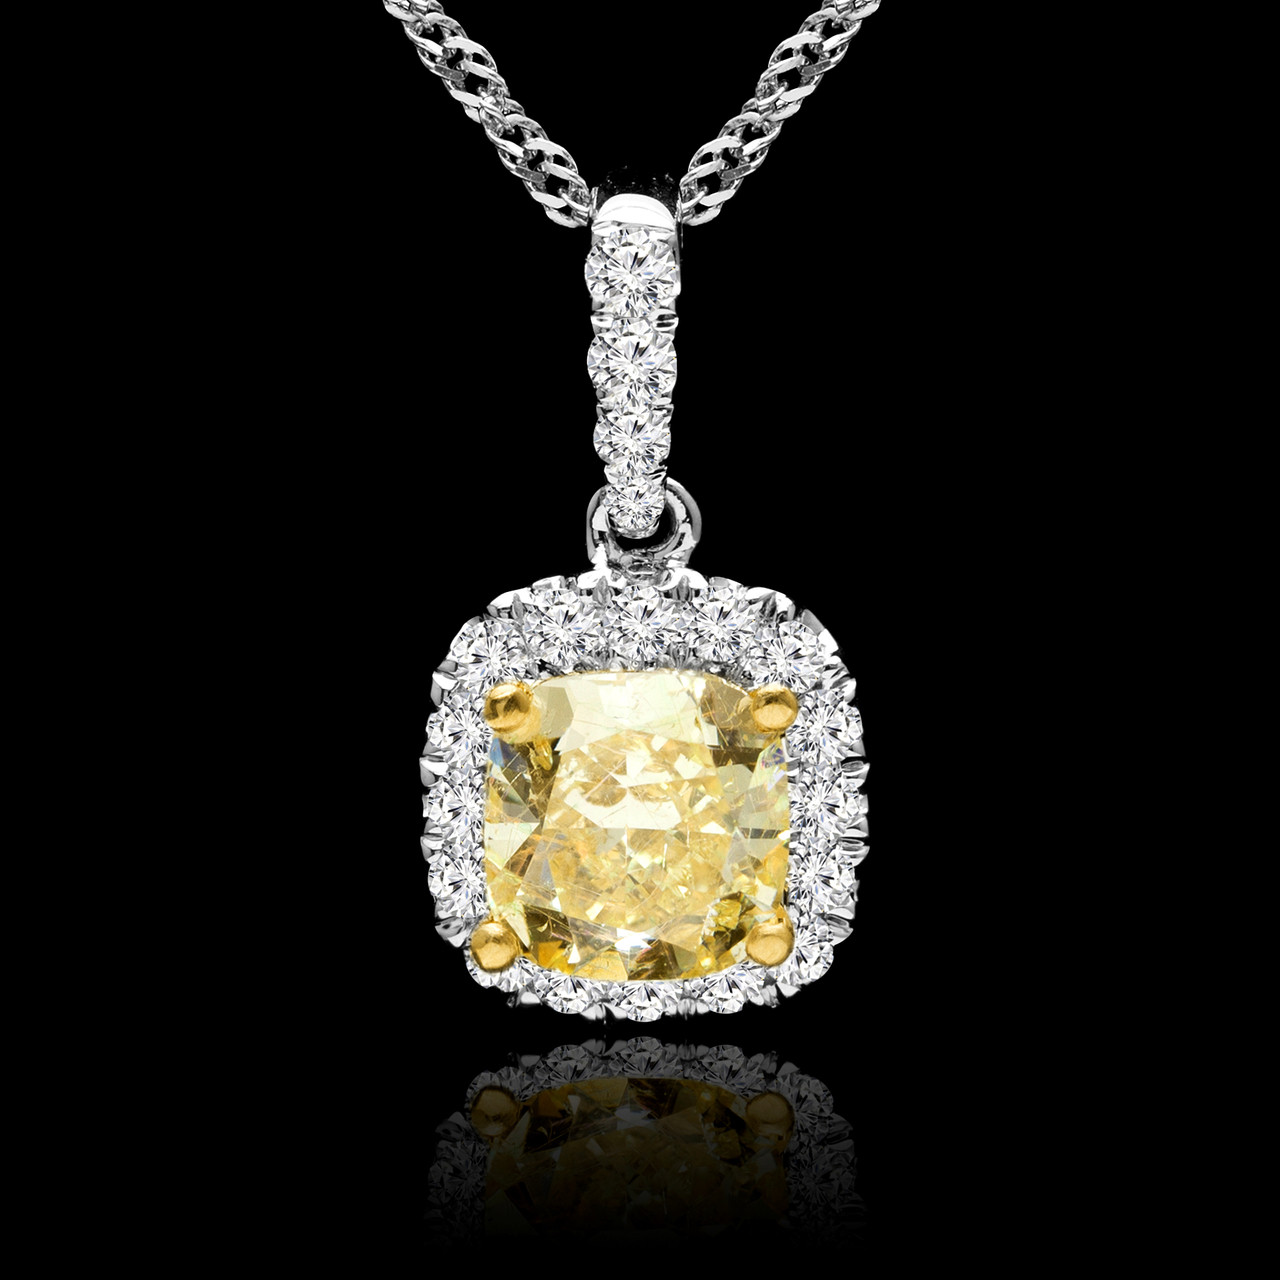 Diamond Essence Slide Pendant with 2.0ct. Cushion Cut Stone in center  surrounded by round stones